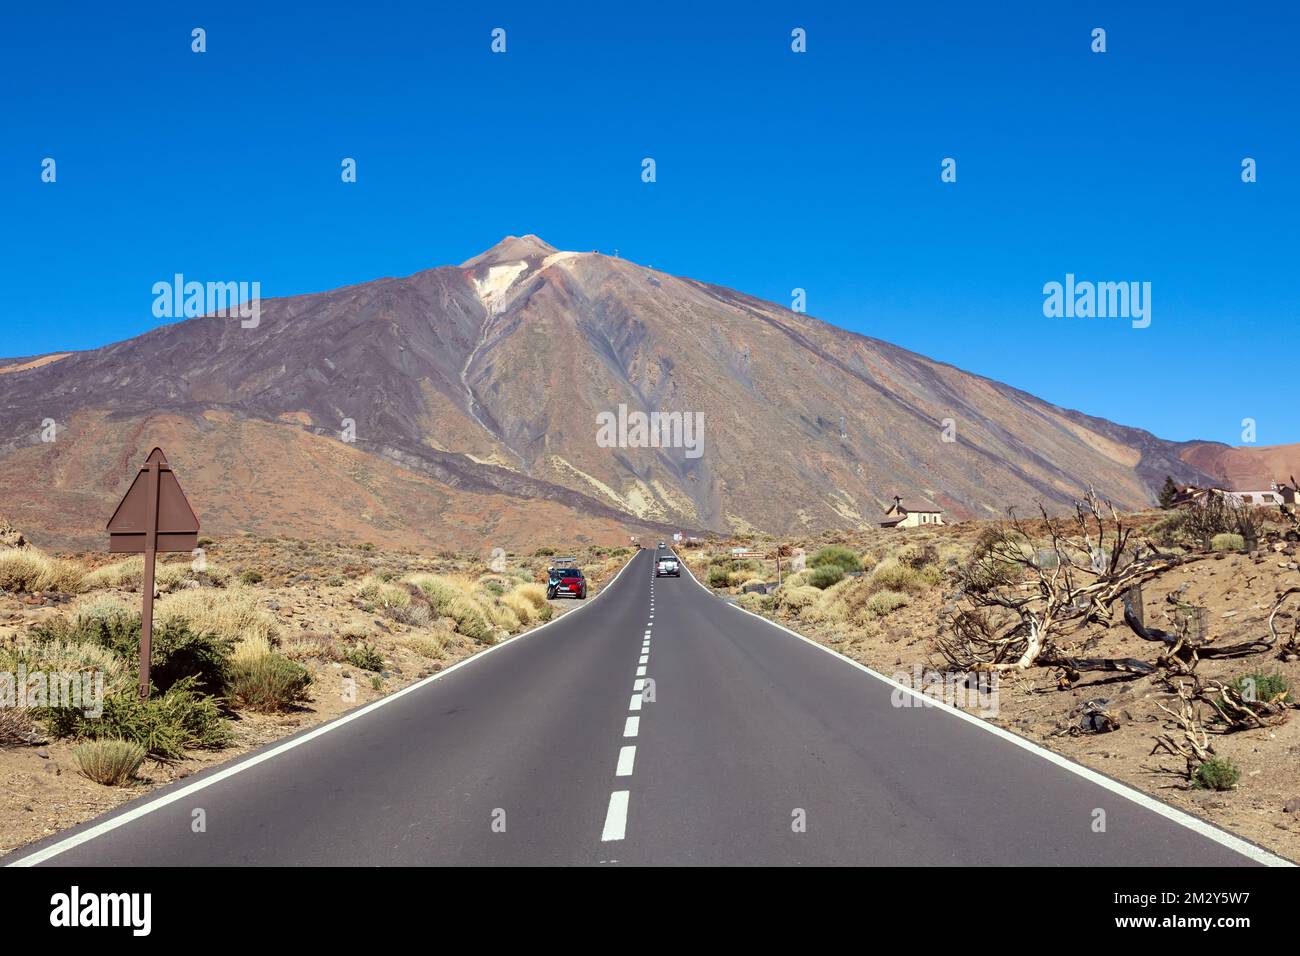 Pico del Teide mountain volcano summit in the background on a sunny day, Teide National Park, Tenerife, Canary Islands, Spain Stock Photo